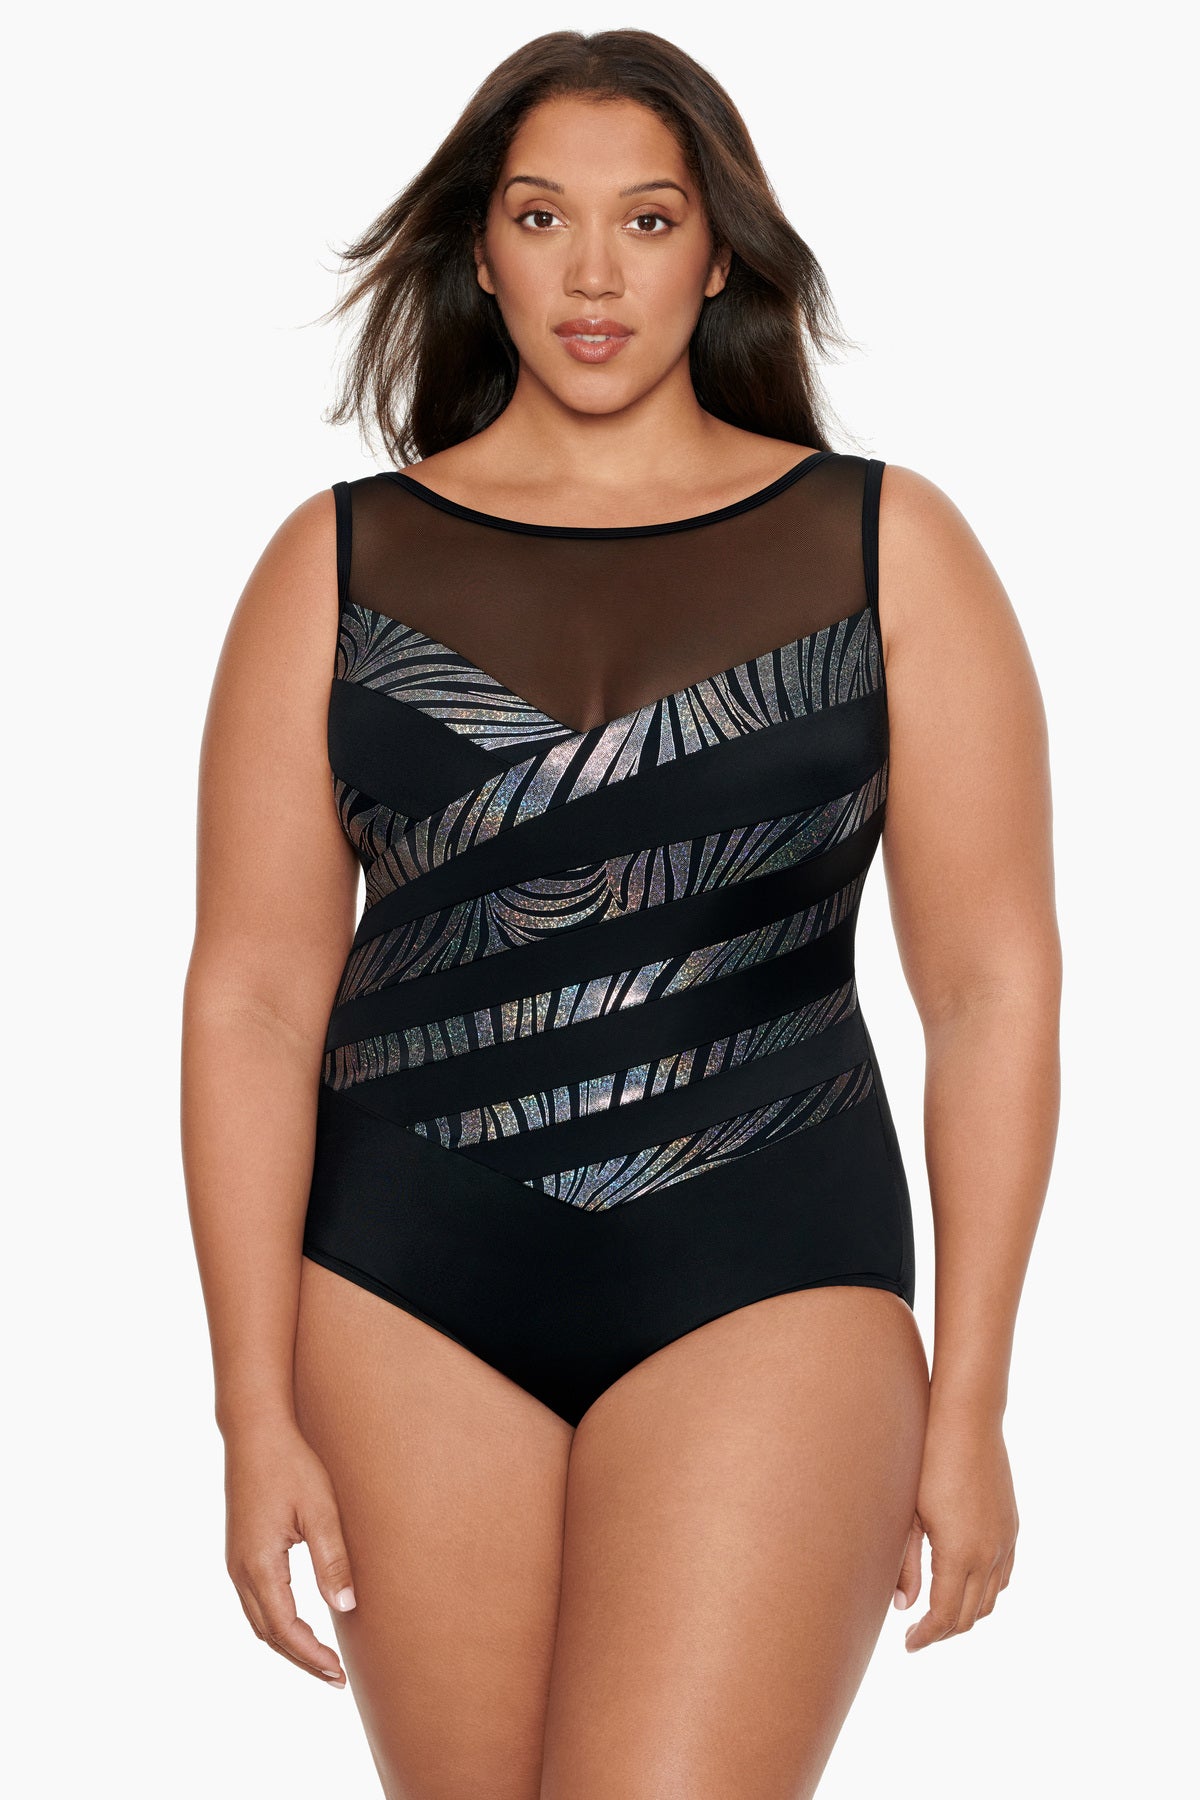 4 One Size Fits All Swimsuits Brands